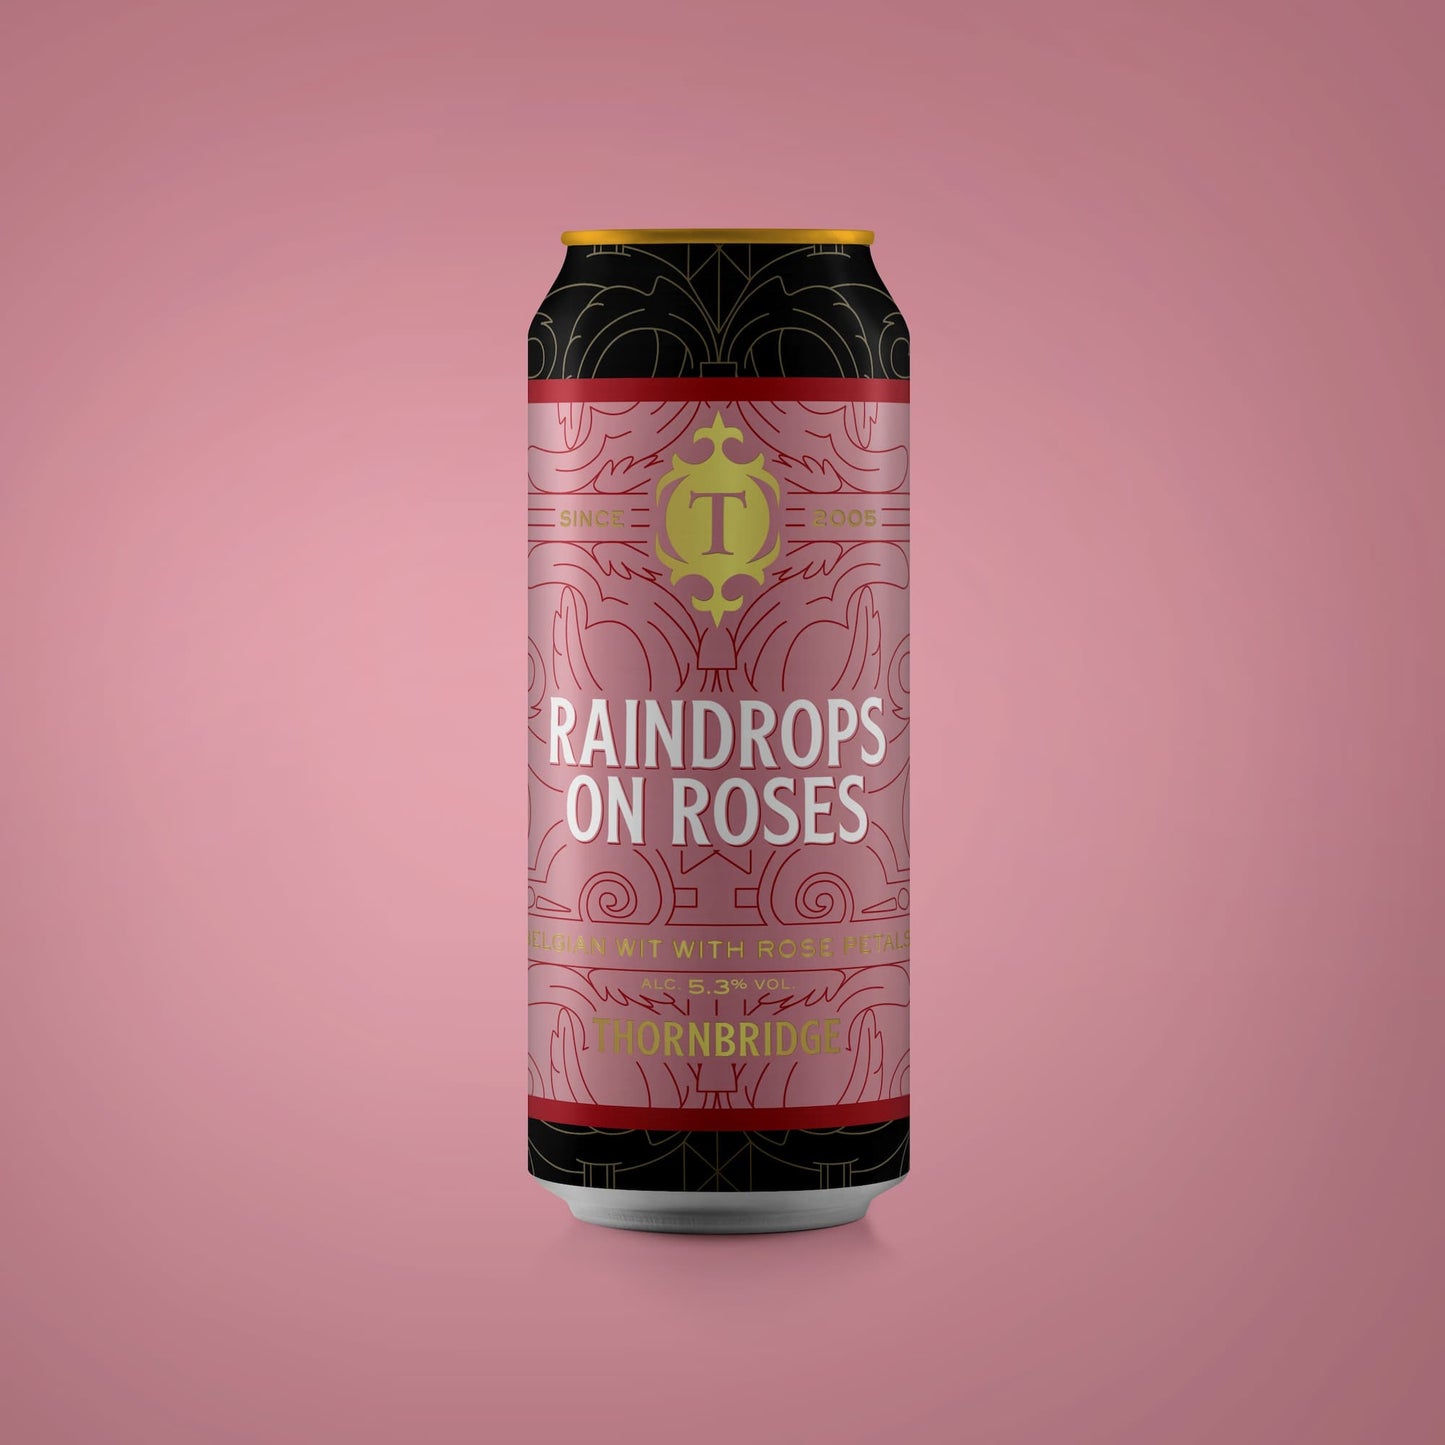 Raindrops on Roses, 5.3% Belgian Wit with Rose Petals Beer - Single Can Thornbridge